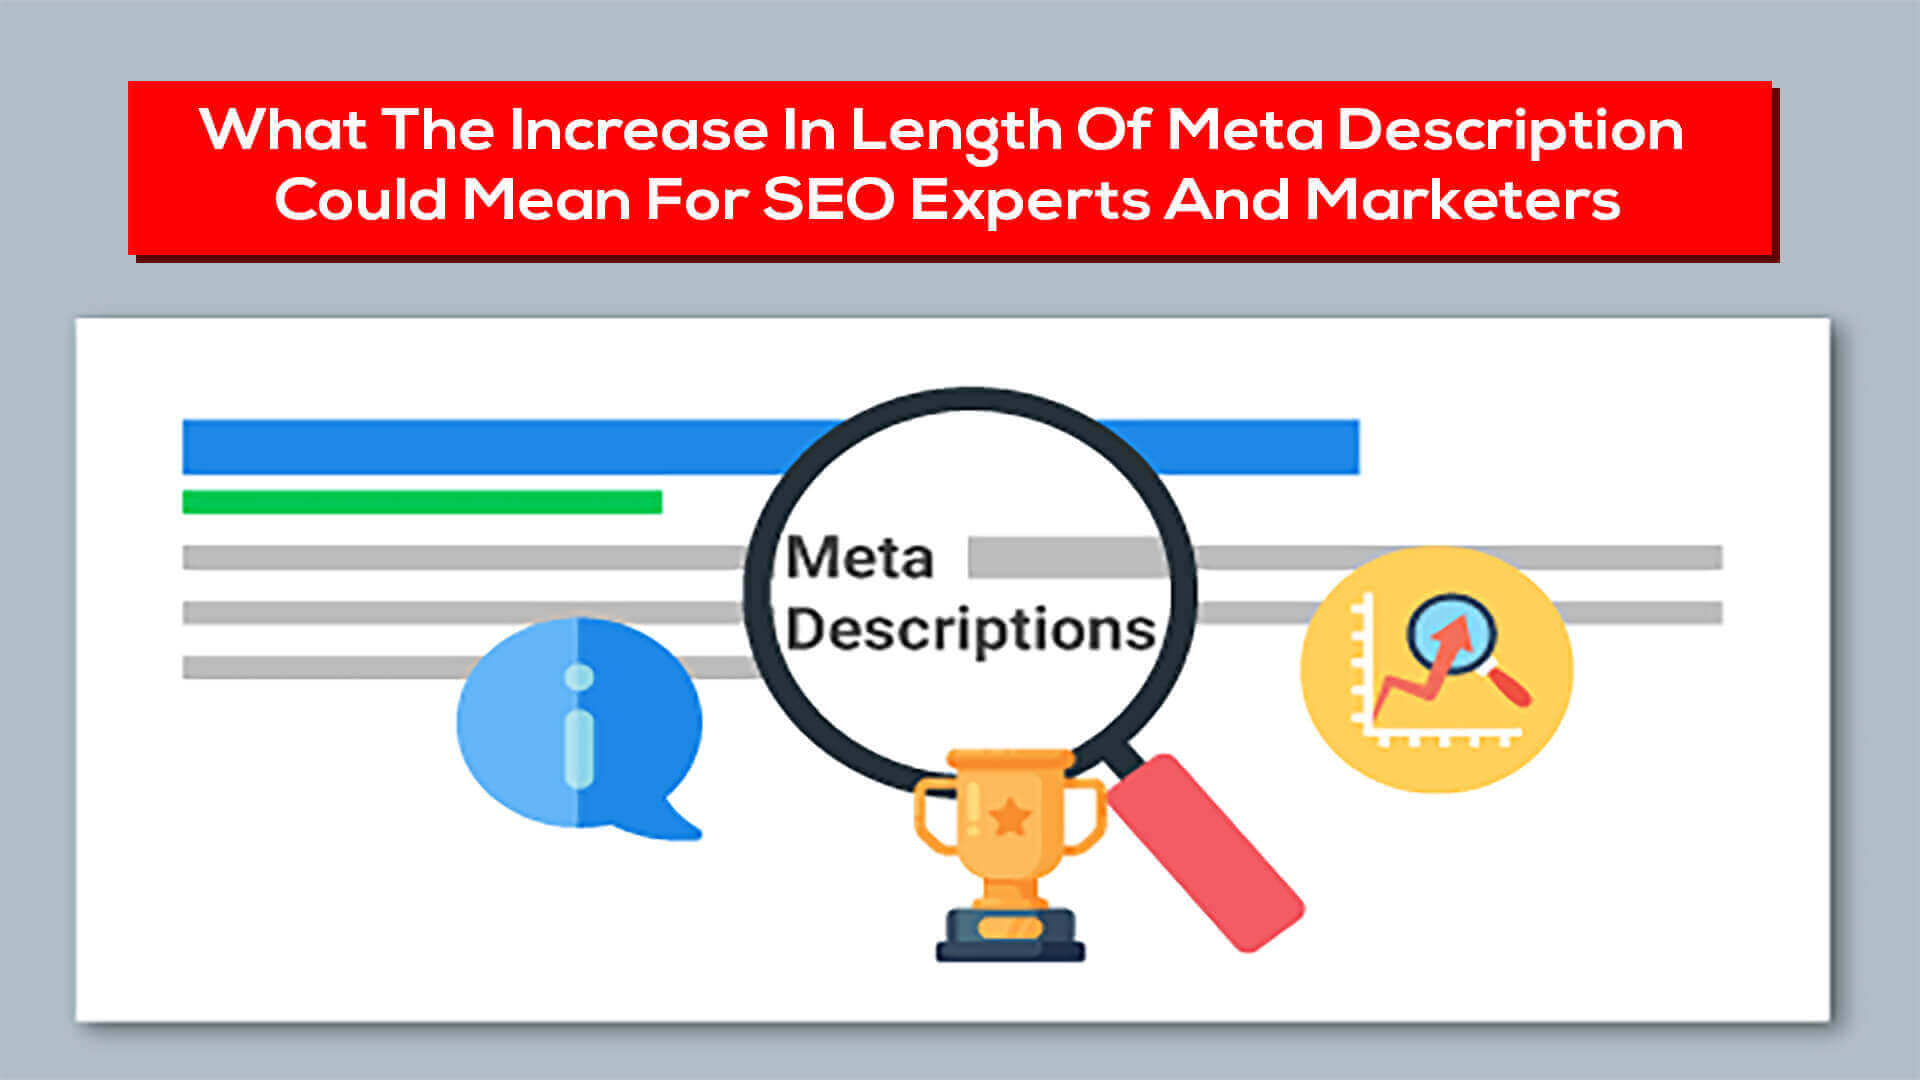 What The Increase In Length Of Meta Description Could Mean For SEO Experts And Marketers